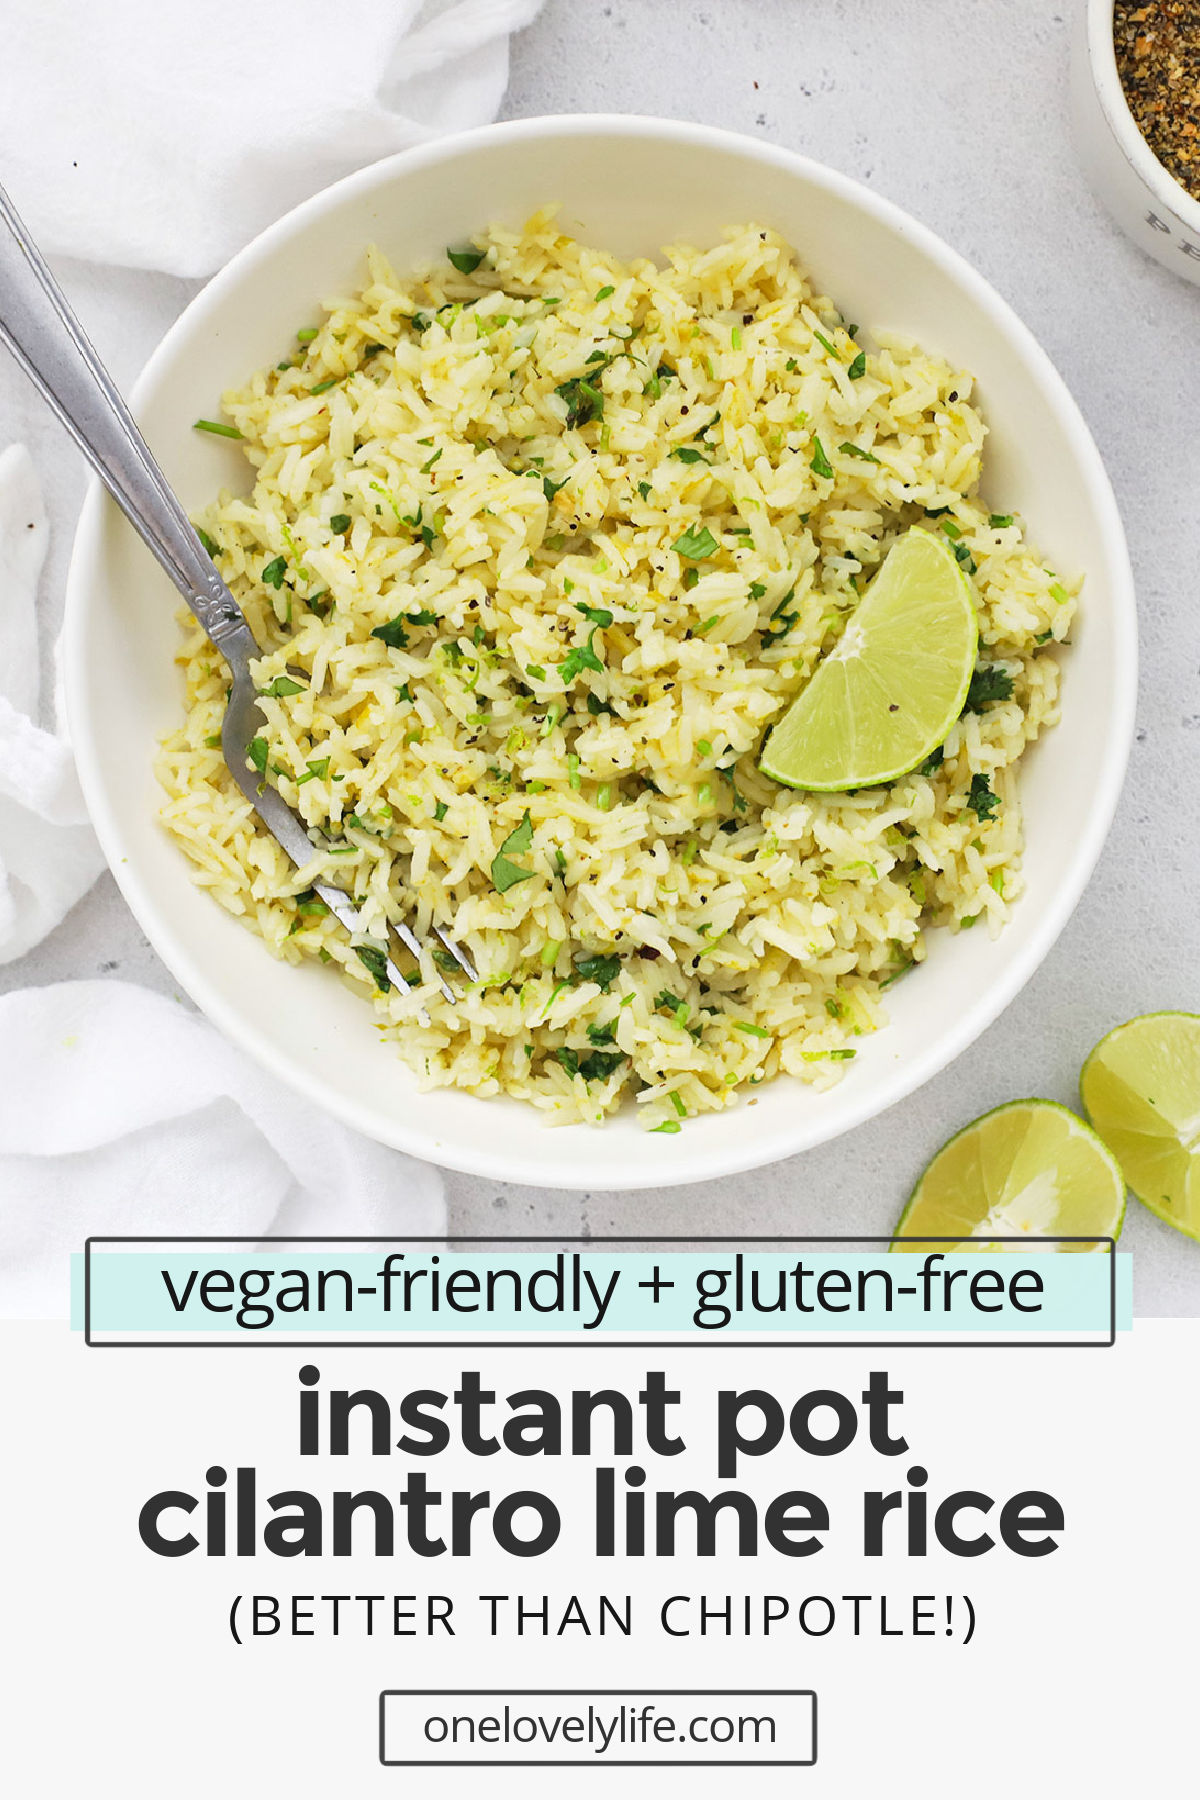 Instant Pot Cilantro Lime Rice - Restaurant style cilantro lime rice is easier than ever thanks to the pressure cooker! This method will give you fluffy, flavorful rice perfect as a side dish, tucked into burrito bowls, burritos & more! (Vegan-friendly, gluten-free) // Chipotle Cilantro Lime Rice // Cafe Rio Cilantro Lime Rice // Pressure Cooker Cilantro Lime Rice // #sidedish #cilantrolimerice #rice #burritobowls #tacos #burritos #texmex #taconight #glutenfree #vegetarian